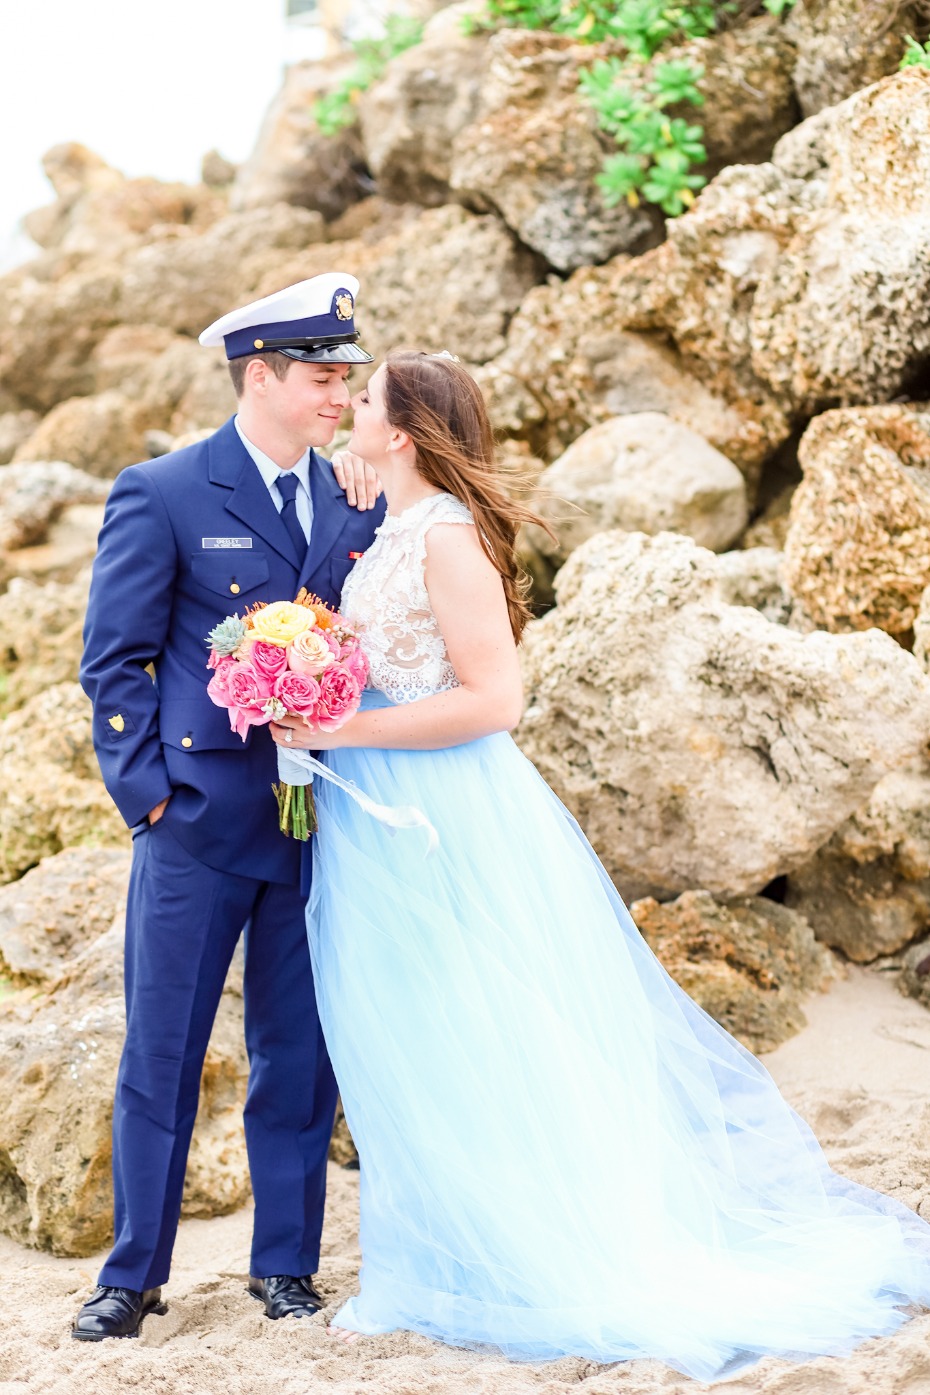 Blue tulle wedding dress with lace top